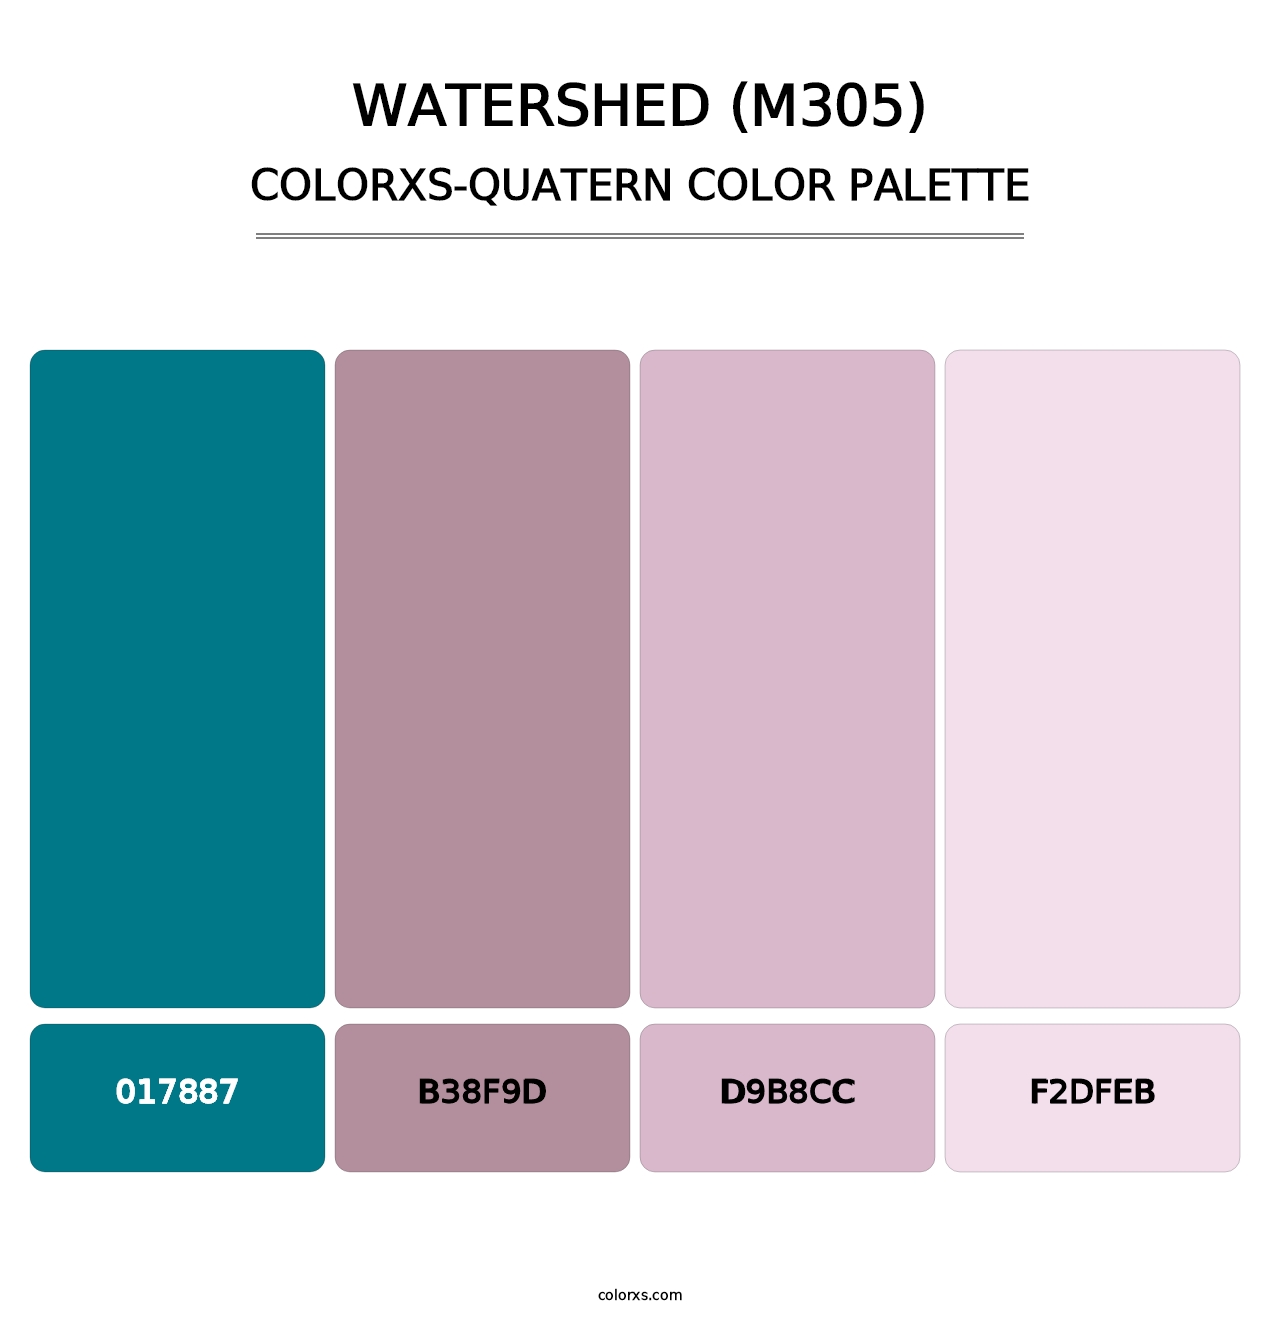 Watershed (M305) - Colorxs Quatern Palette